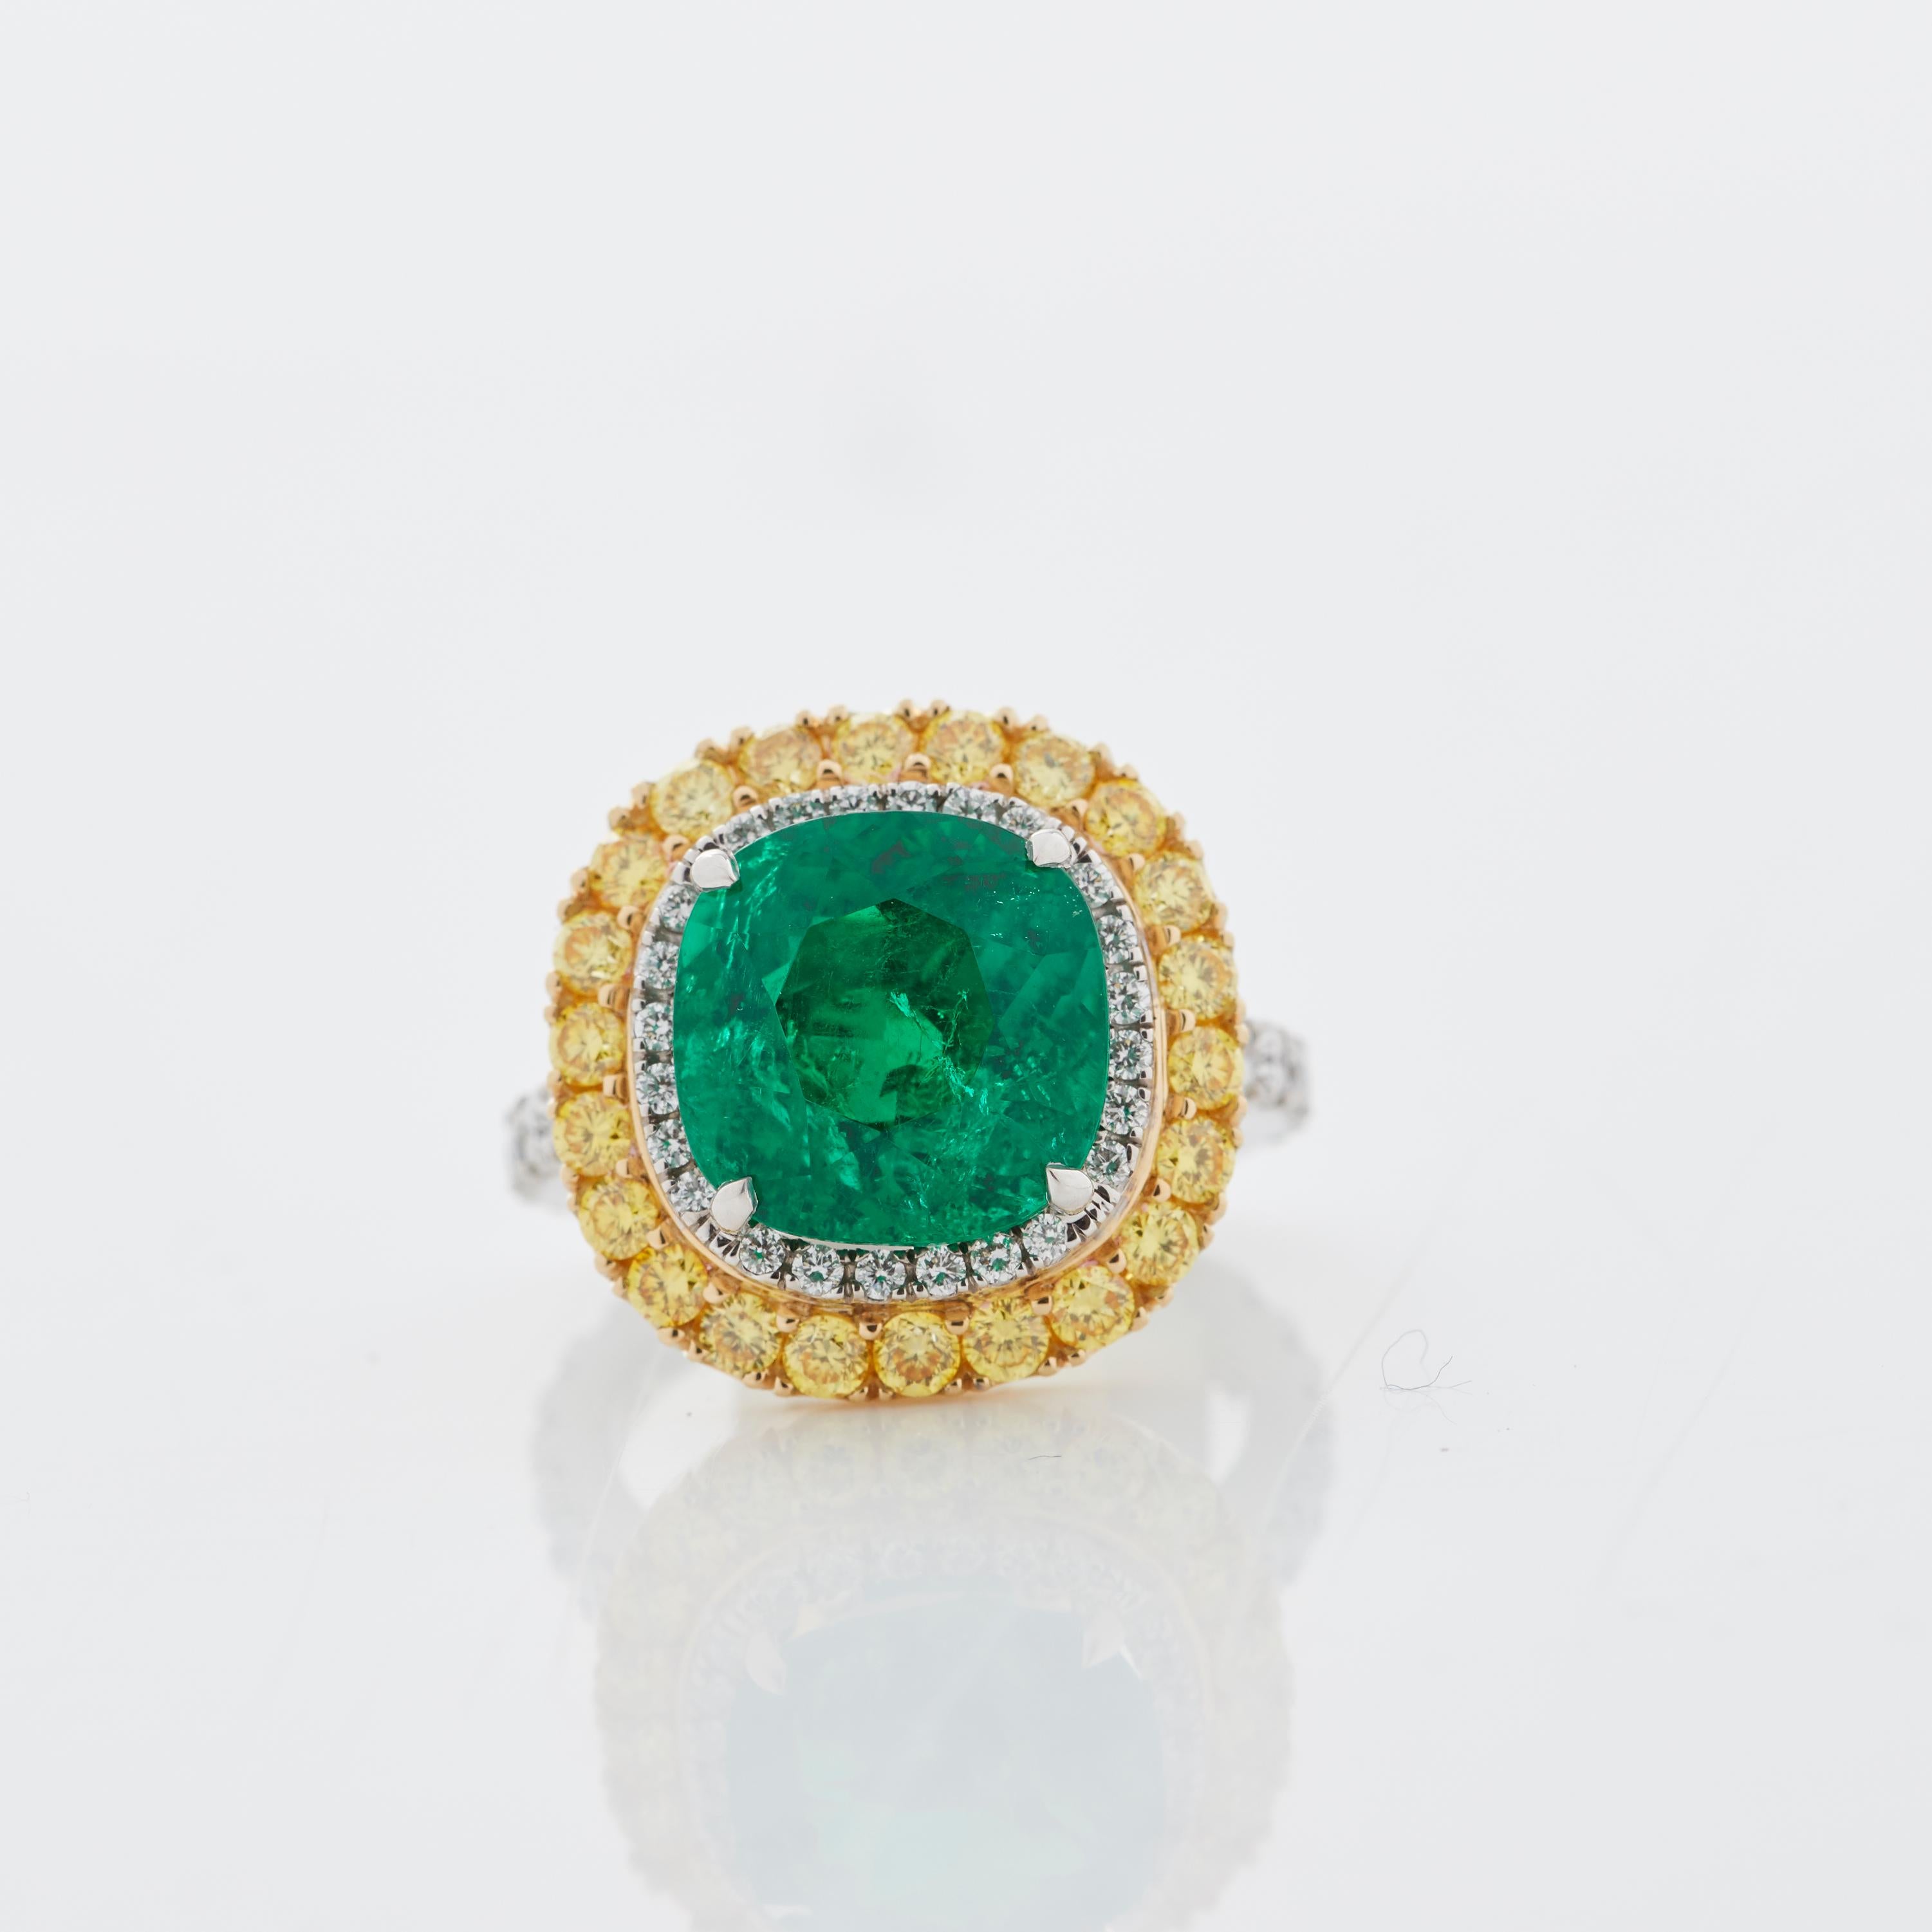 A House of Garrard 18 karat white gold 'Jewelled Vault' ring, set with round white diamonds, round yellow diamonds and a central cushion cut emerald. 

1 cushion cut emerald weighing: 6.70cts 
38 round white diamonds weighing: 0.90cts               